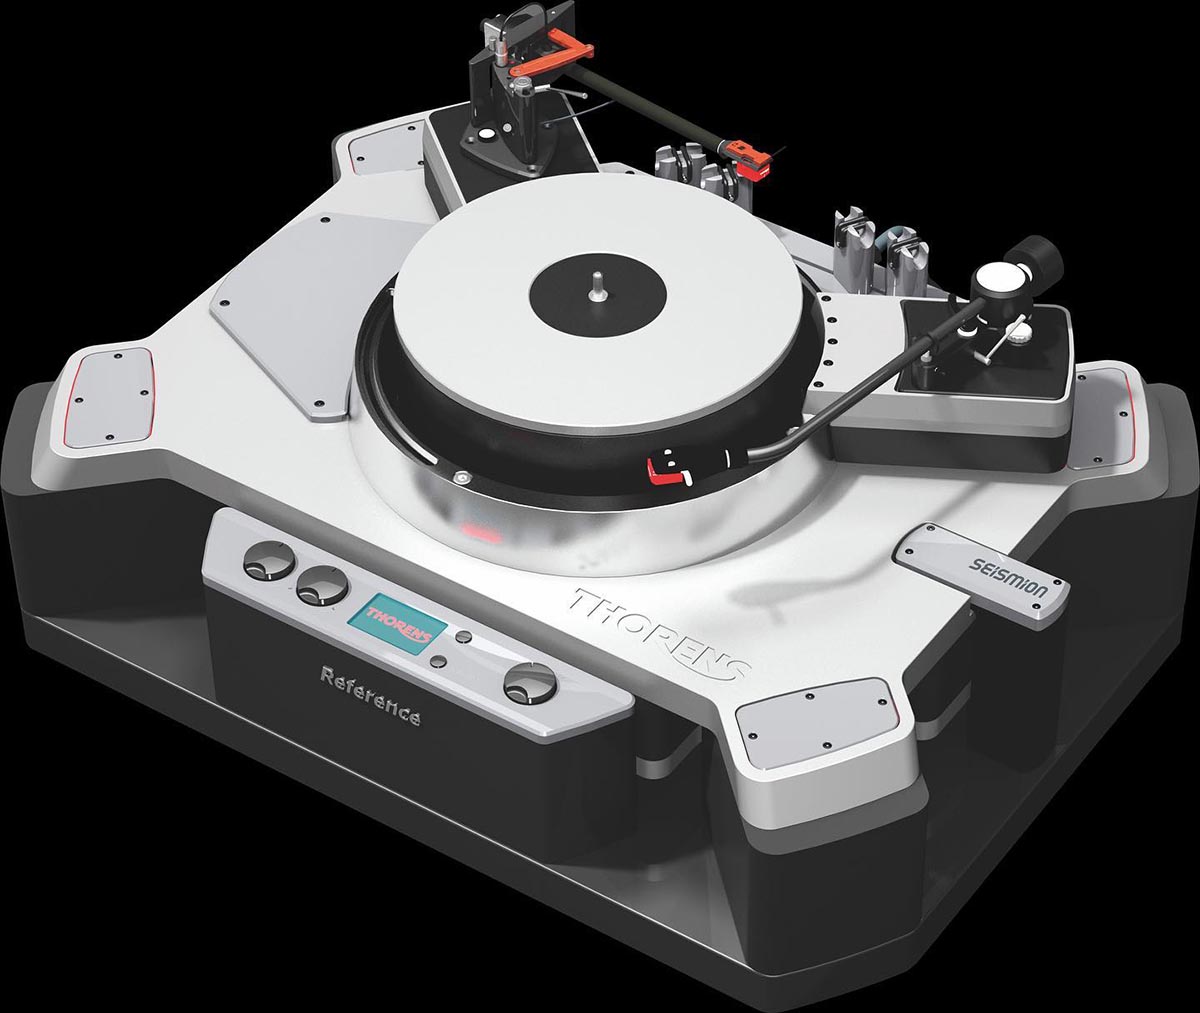 nghenhin_vietnam_chi_tiet_cong_nghe_ky_thuat_mam_than_thorens_new_reference_2023_turntable_h4.jpg (116 KB)